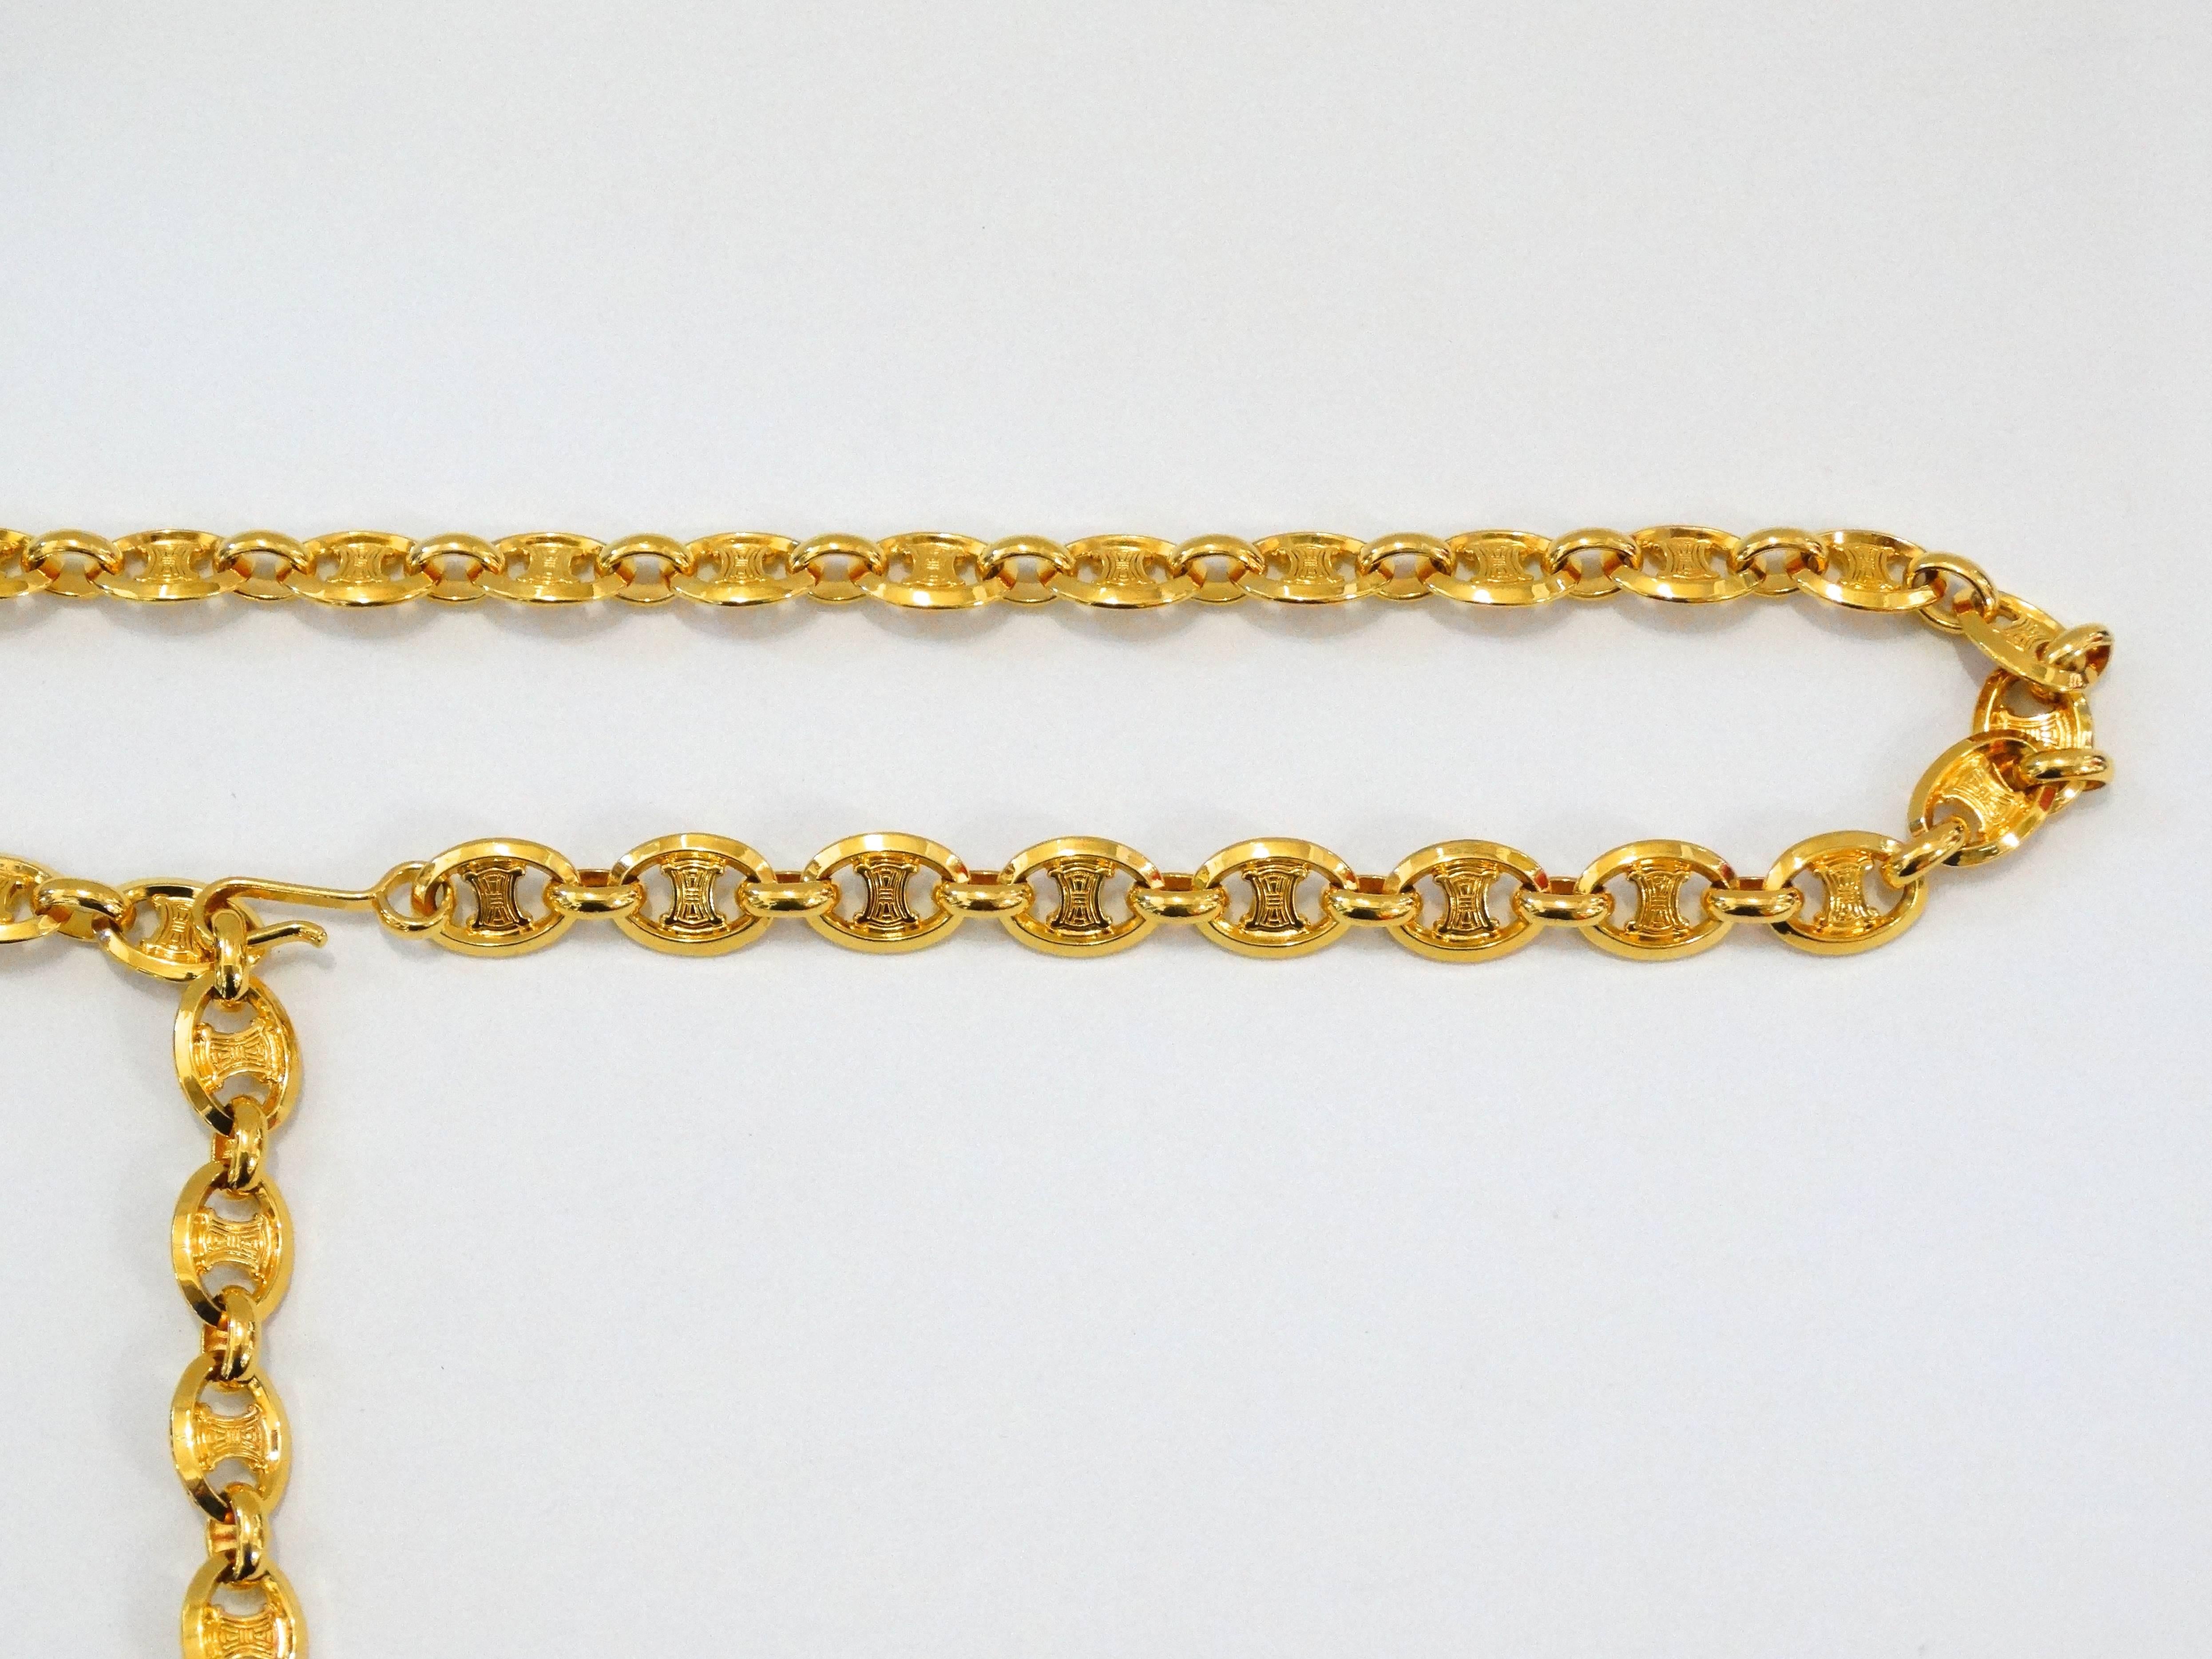 Elevate your look with our Celine chain belt! Thick chain cast in a brilliant gold metal. Celine logo charm dangles from the waist. Adjustable with hook closure that allows for a range of sizes to enjoy this piece! 

Length 38.5